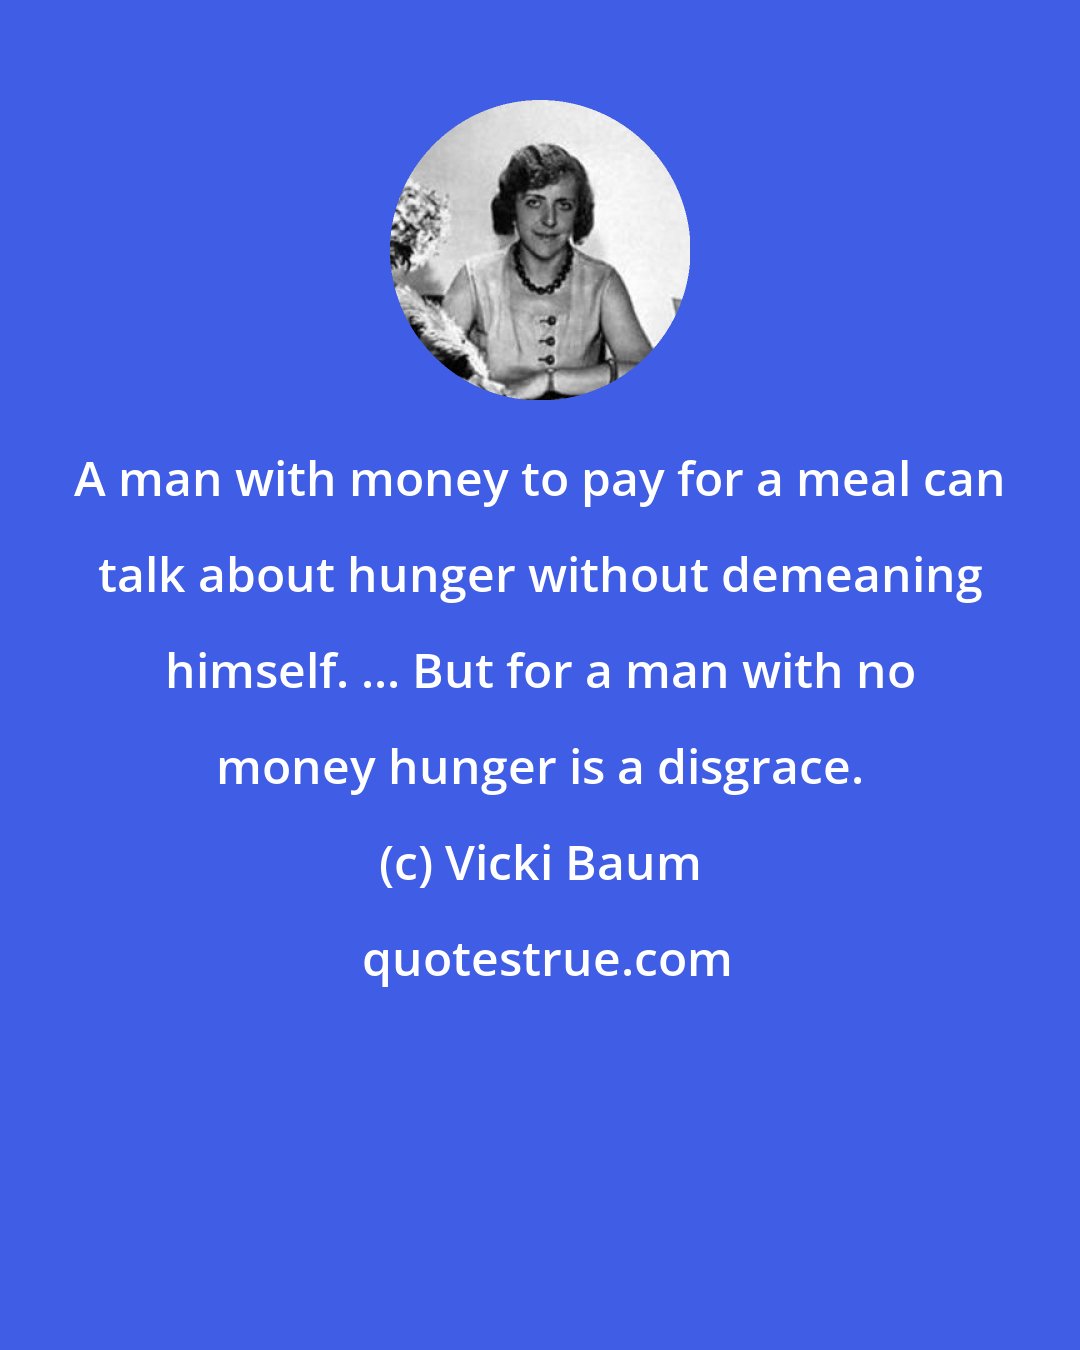 Vicki Baum: A man with money to pay for a meal can talk about hunger without demeaning himself. ... But for a man with no money hunger is a disgrace.